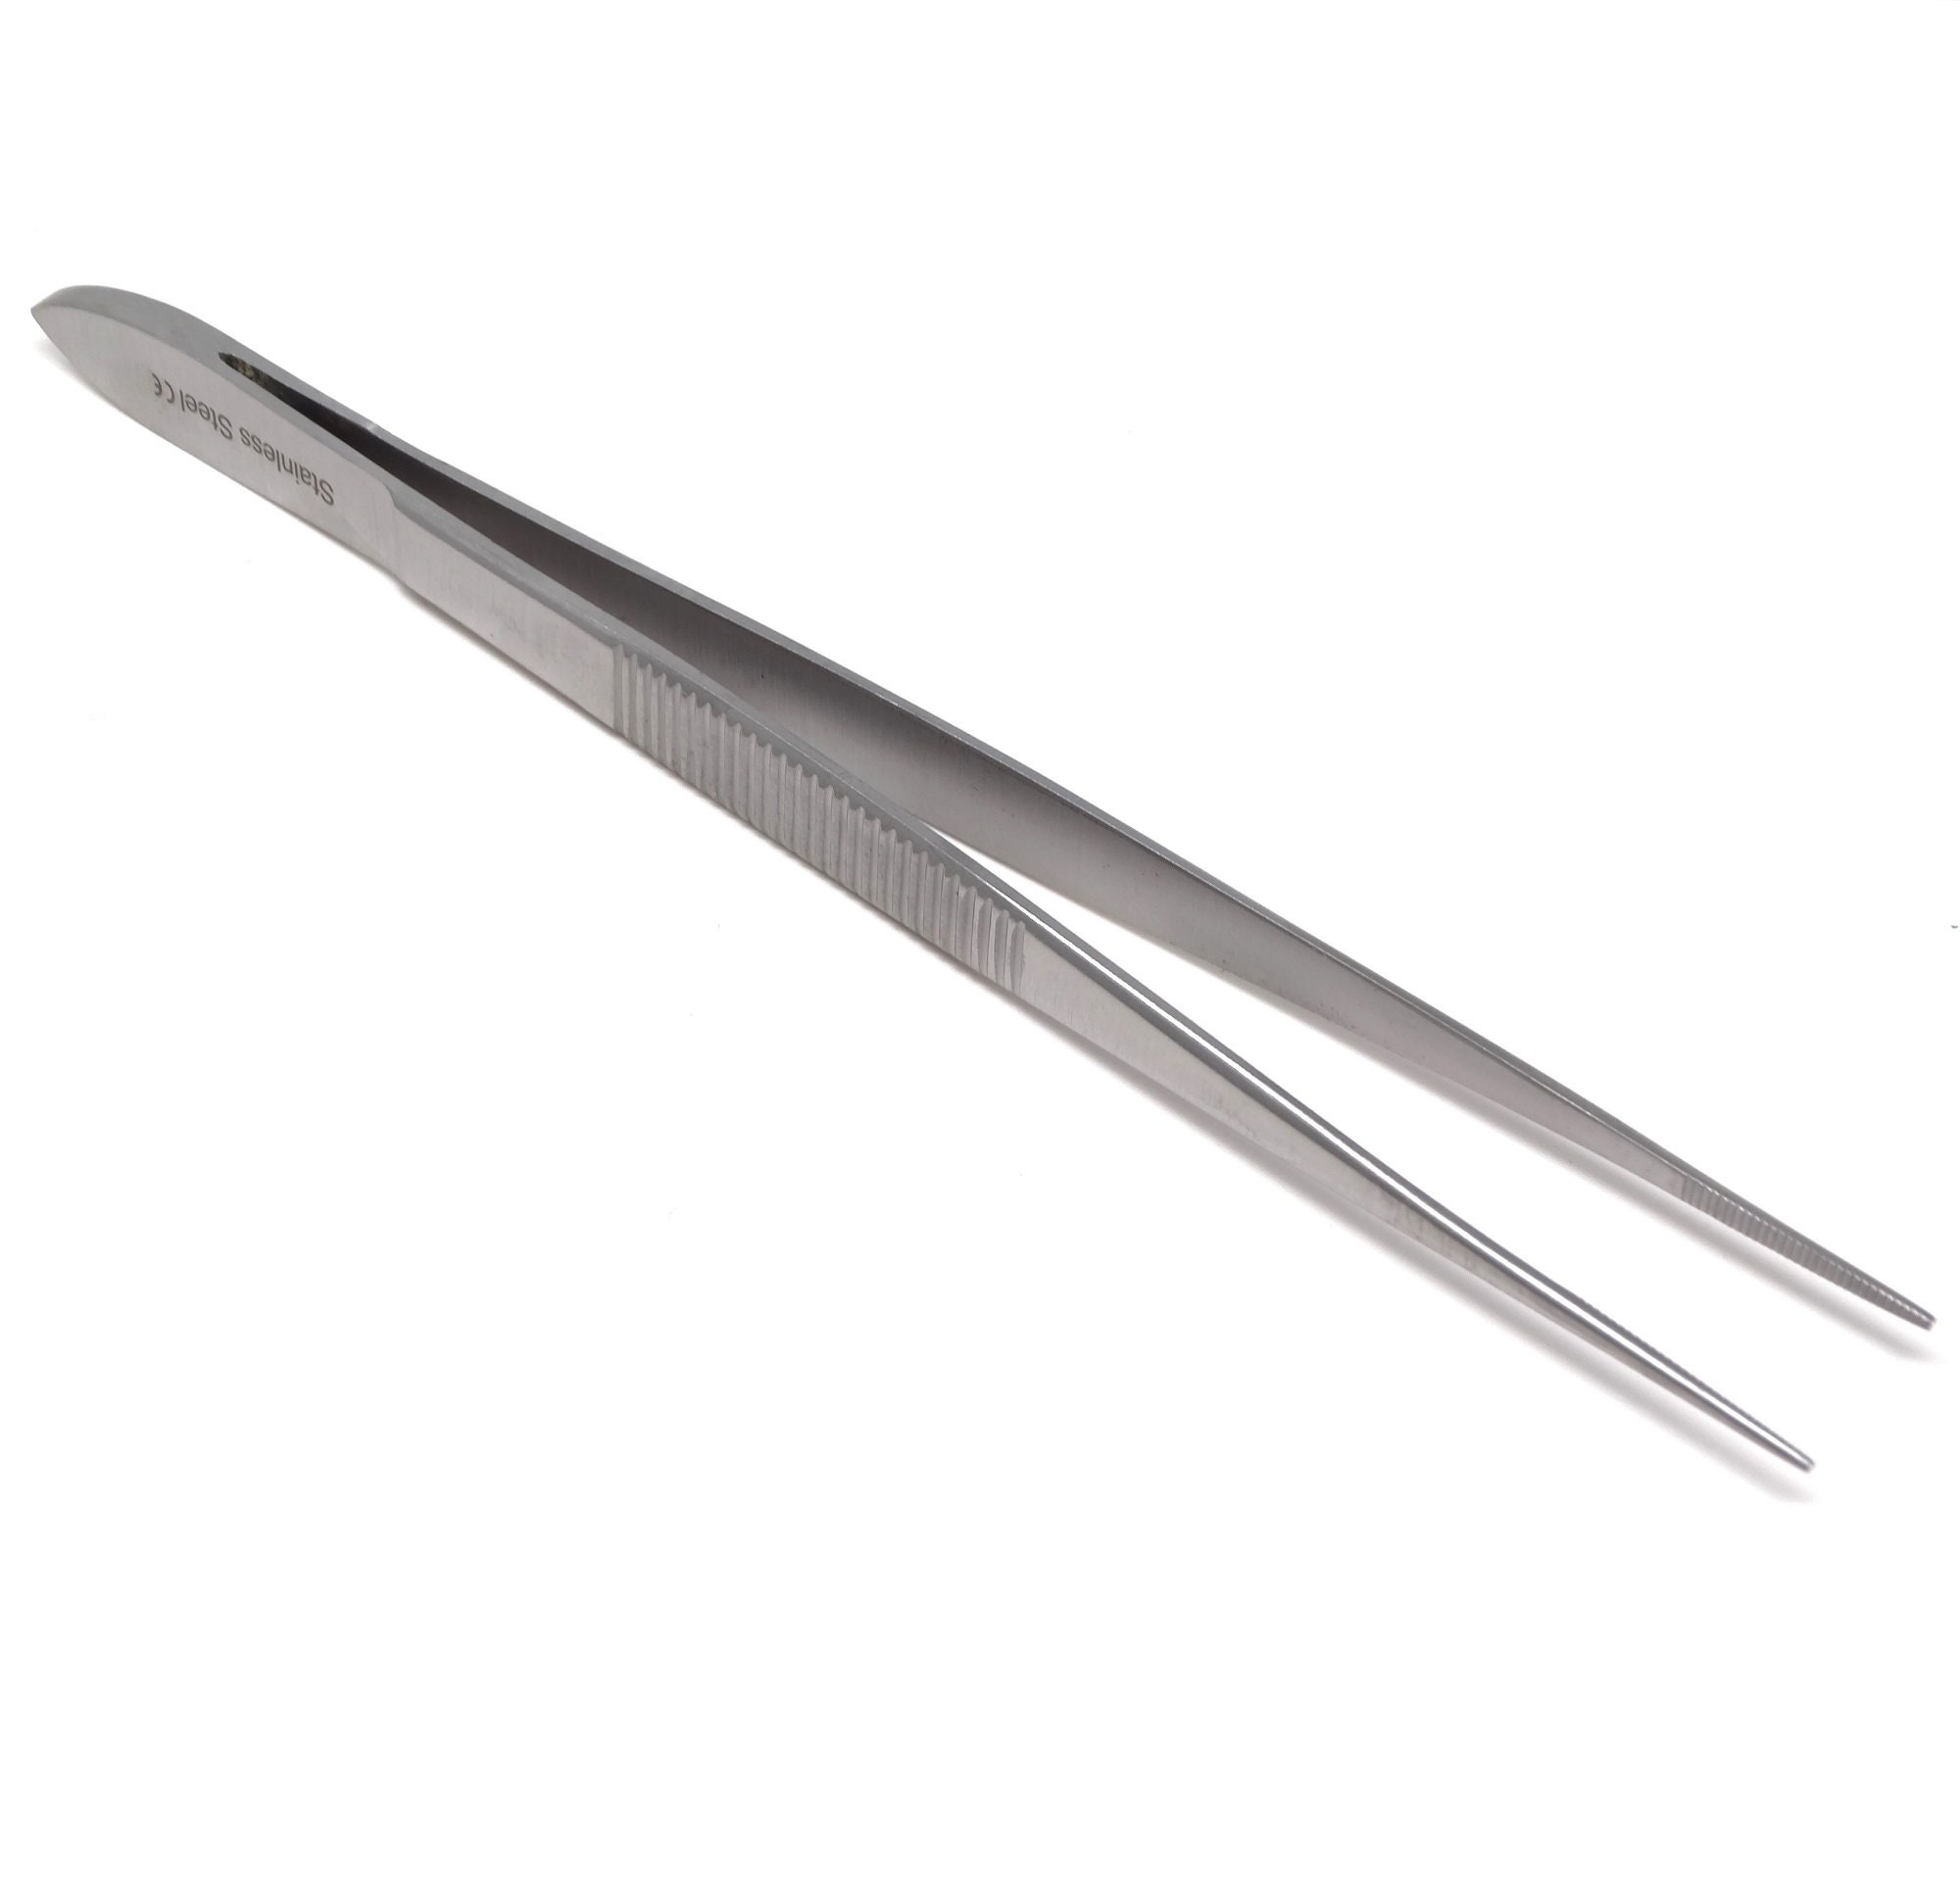 Stainless Steel Tweezers Point Serrated Tips 6 Curved for Art Class Supplies DIY Tool